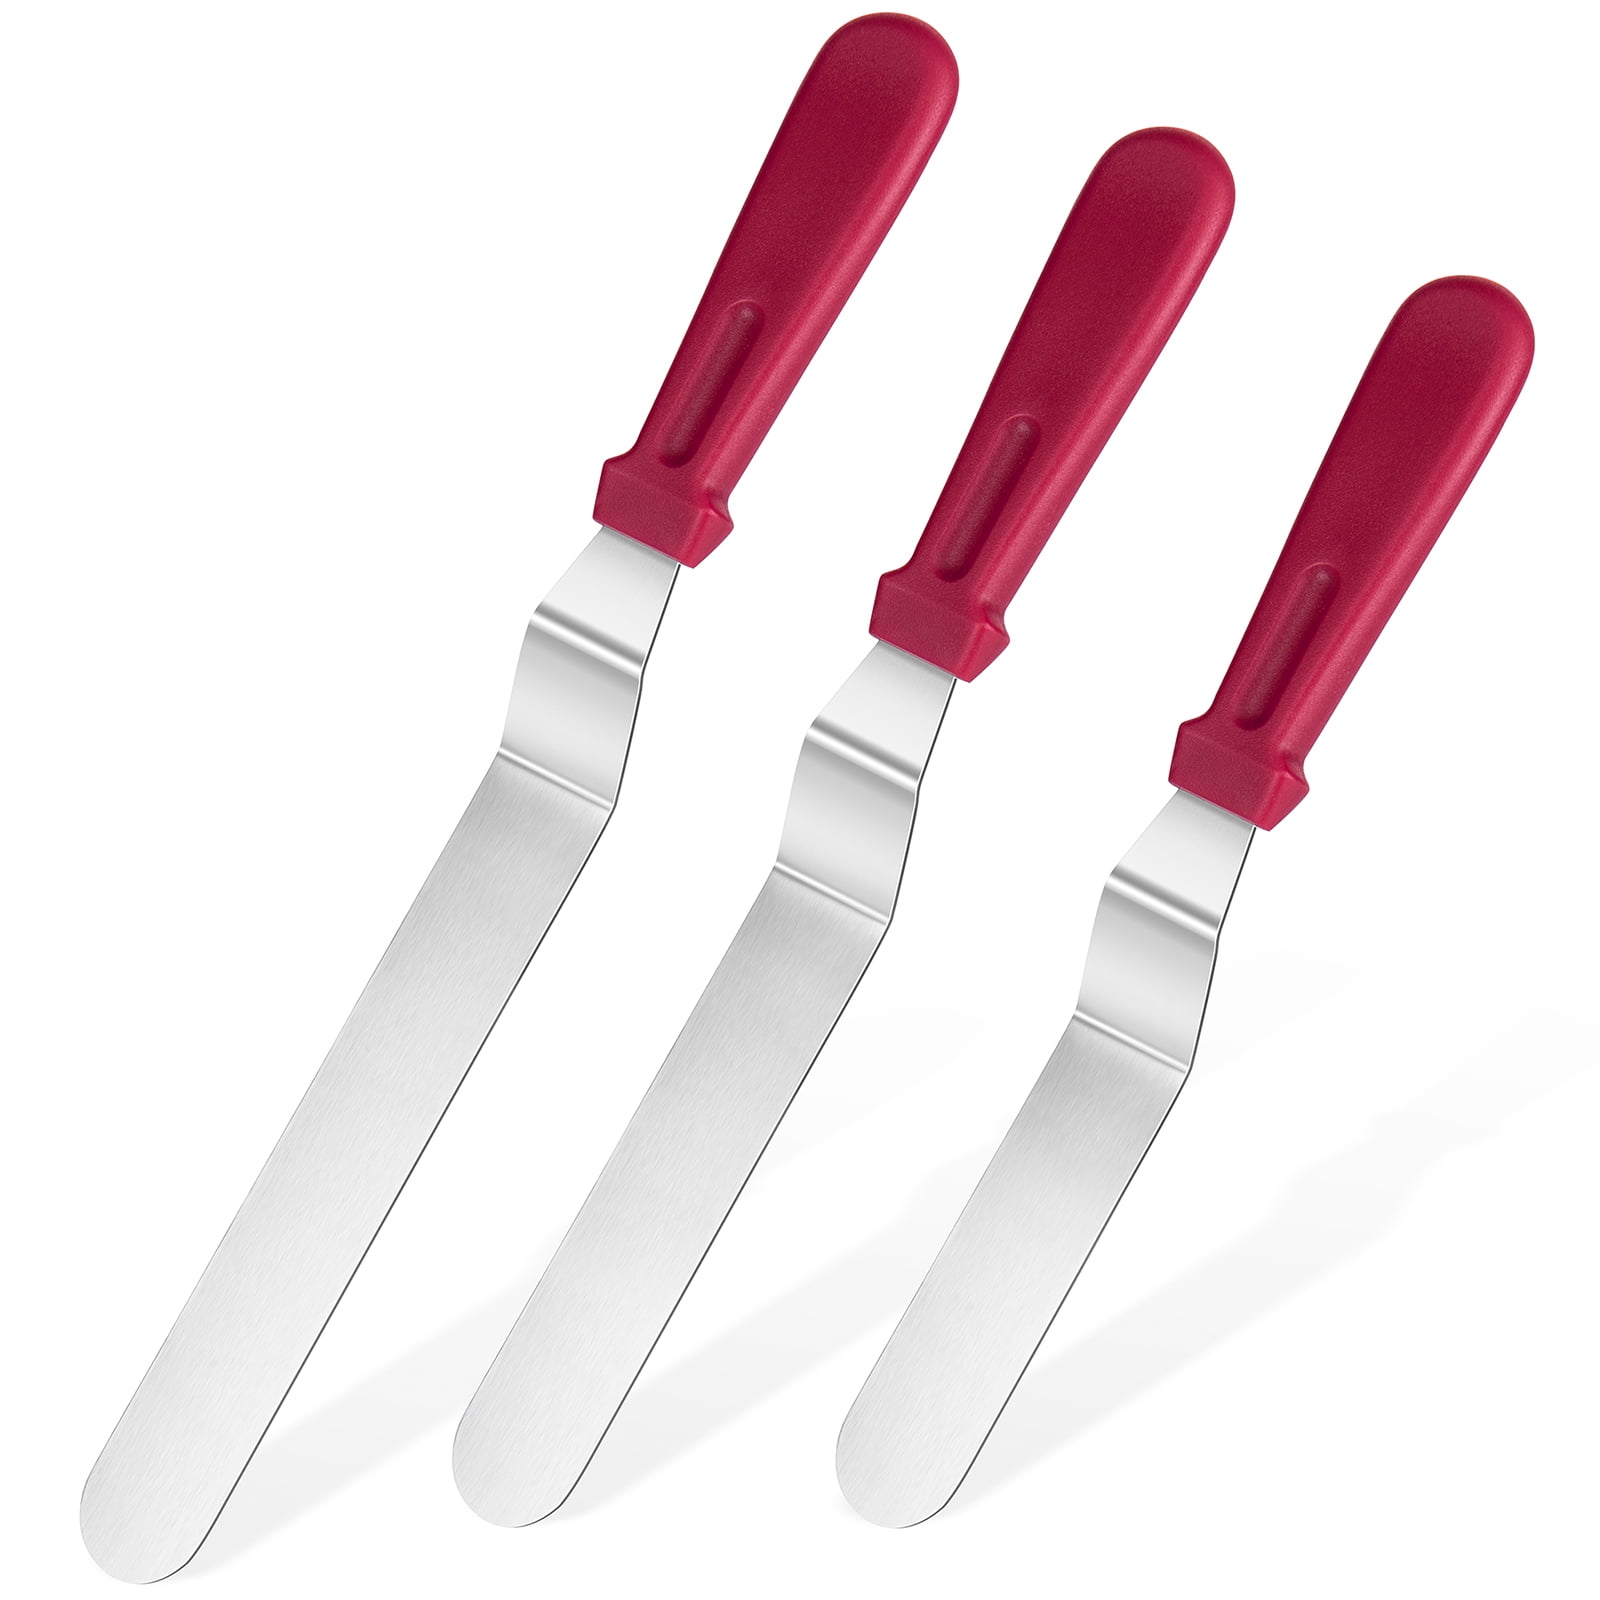 Simple preading simple preading stainless steel spatula spreader